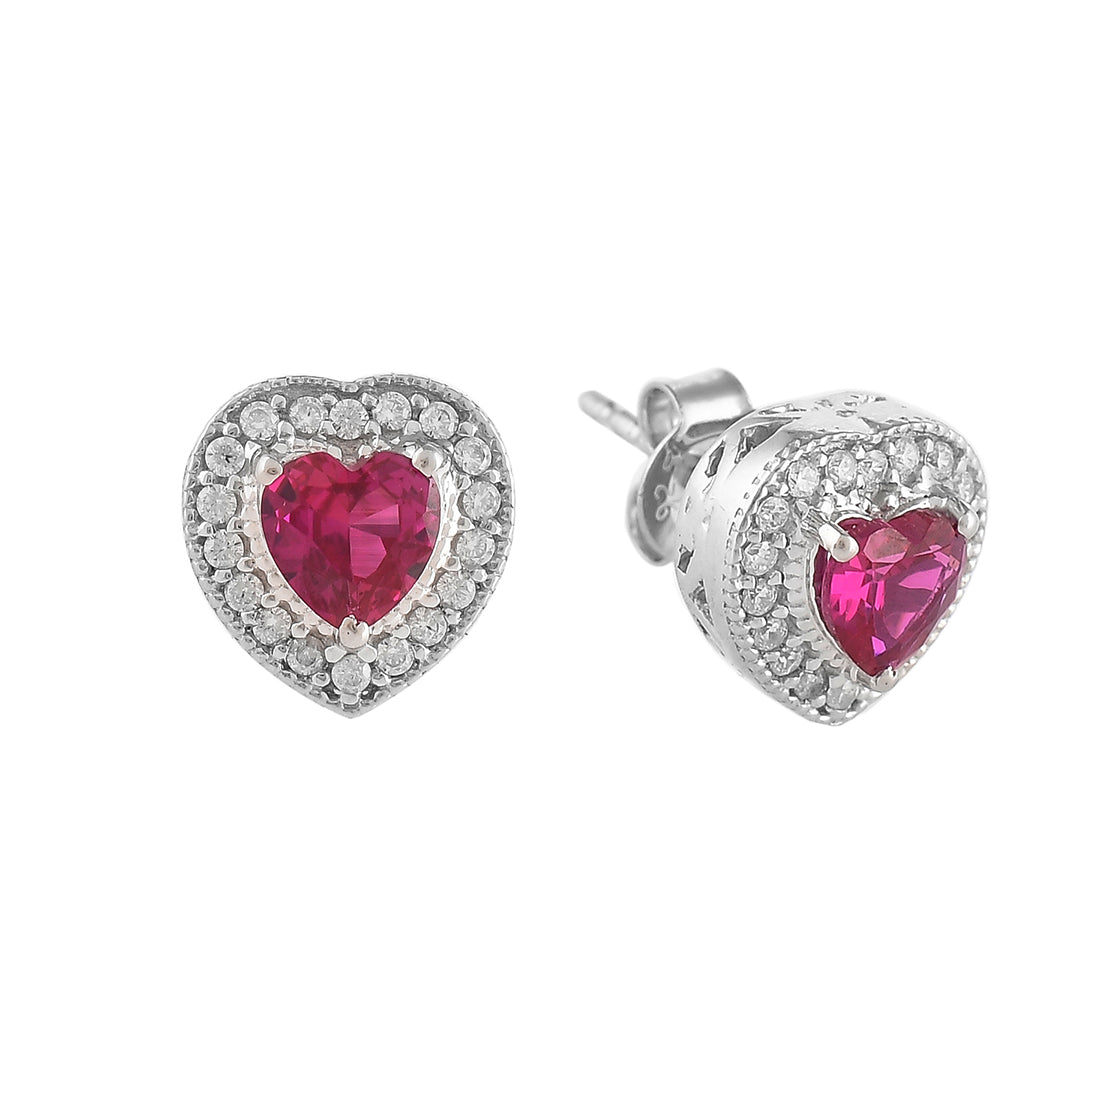 Women's Heart Red And Silver Cz Stud Earrings - Voylla